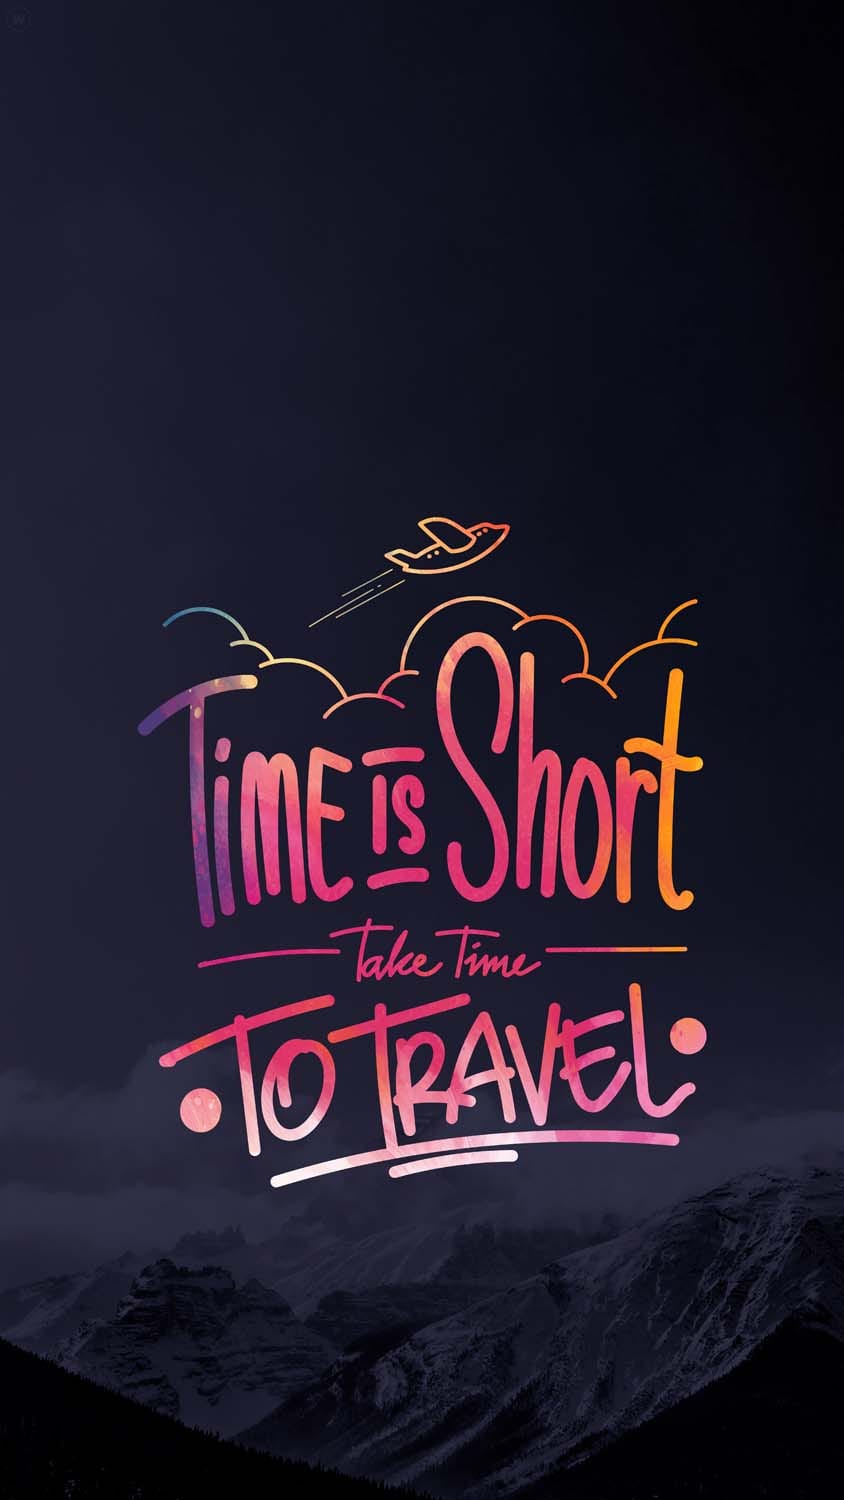 Take Time to Travel iPhone Wallpaper HD